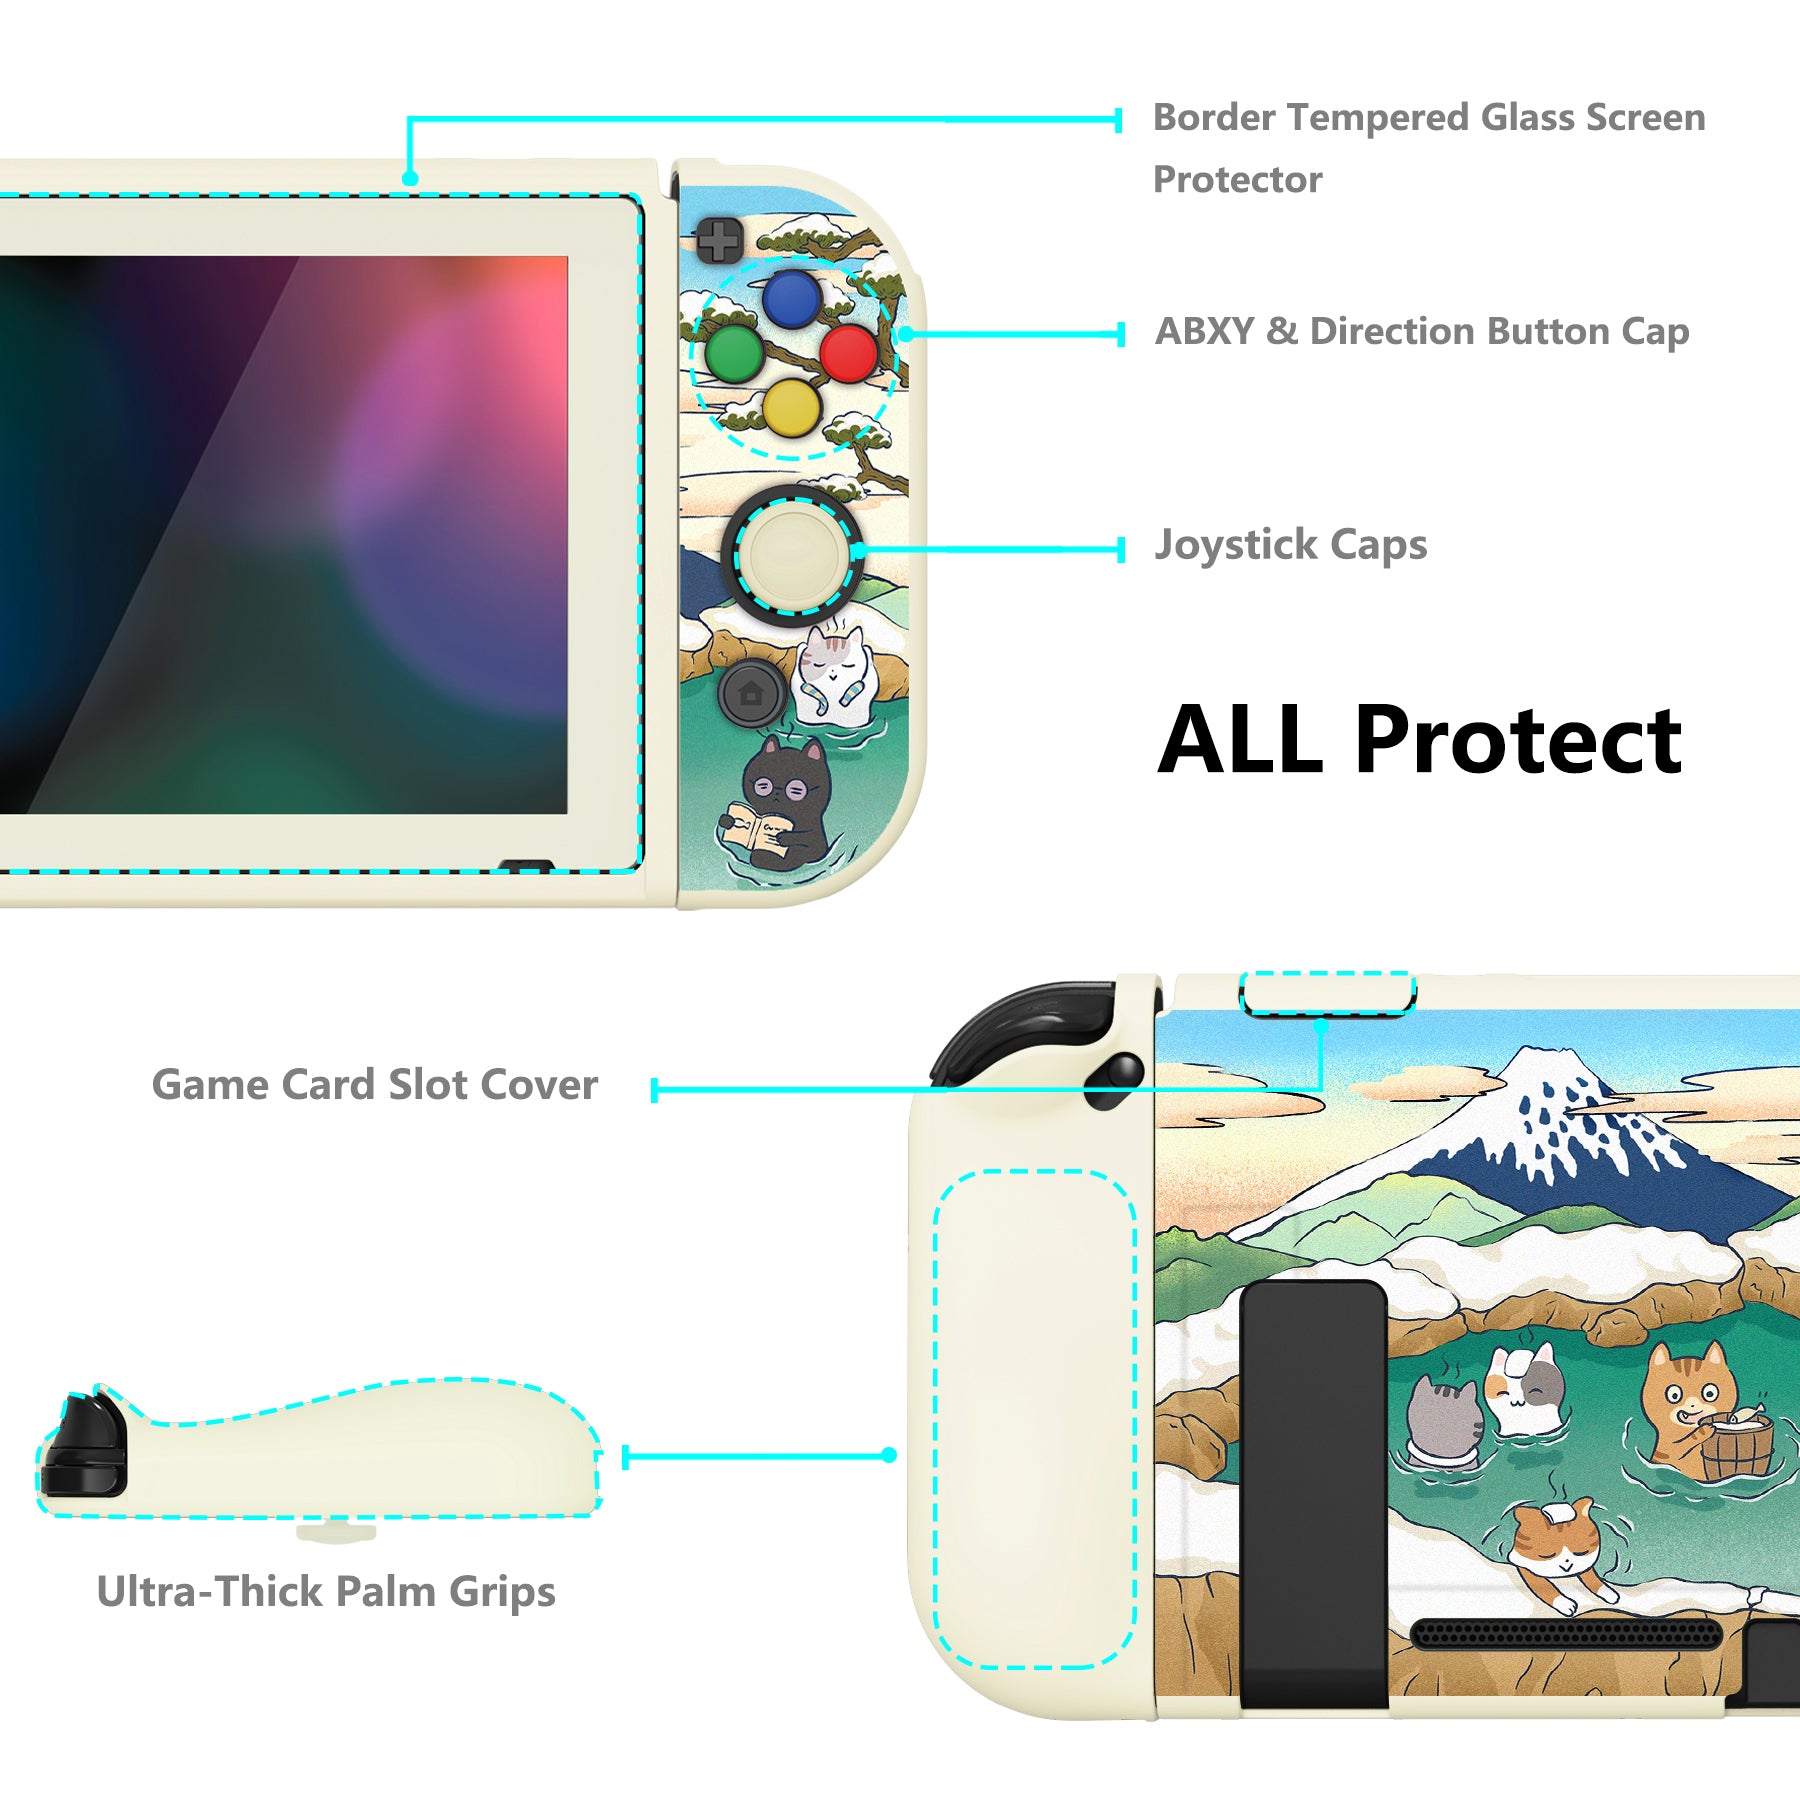 PlayVital ZealProtect Soft Protective Case for Nintendo Switch, Flexible Cover for Switch with Tempered Glass Screen Protector & Thumb Grips & ABXY Direction Button Caps - Hot Spring Kitties - RNSYV6047 playvital